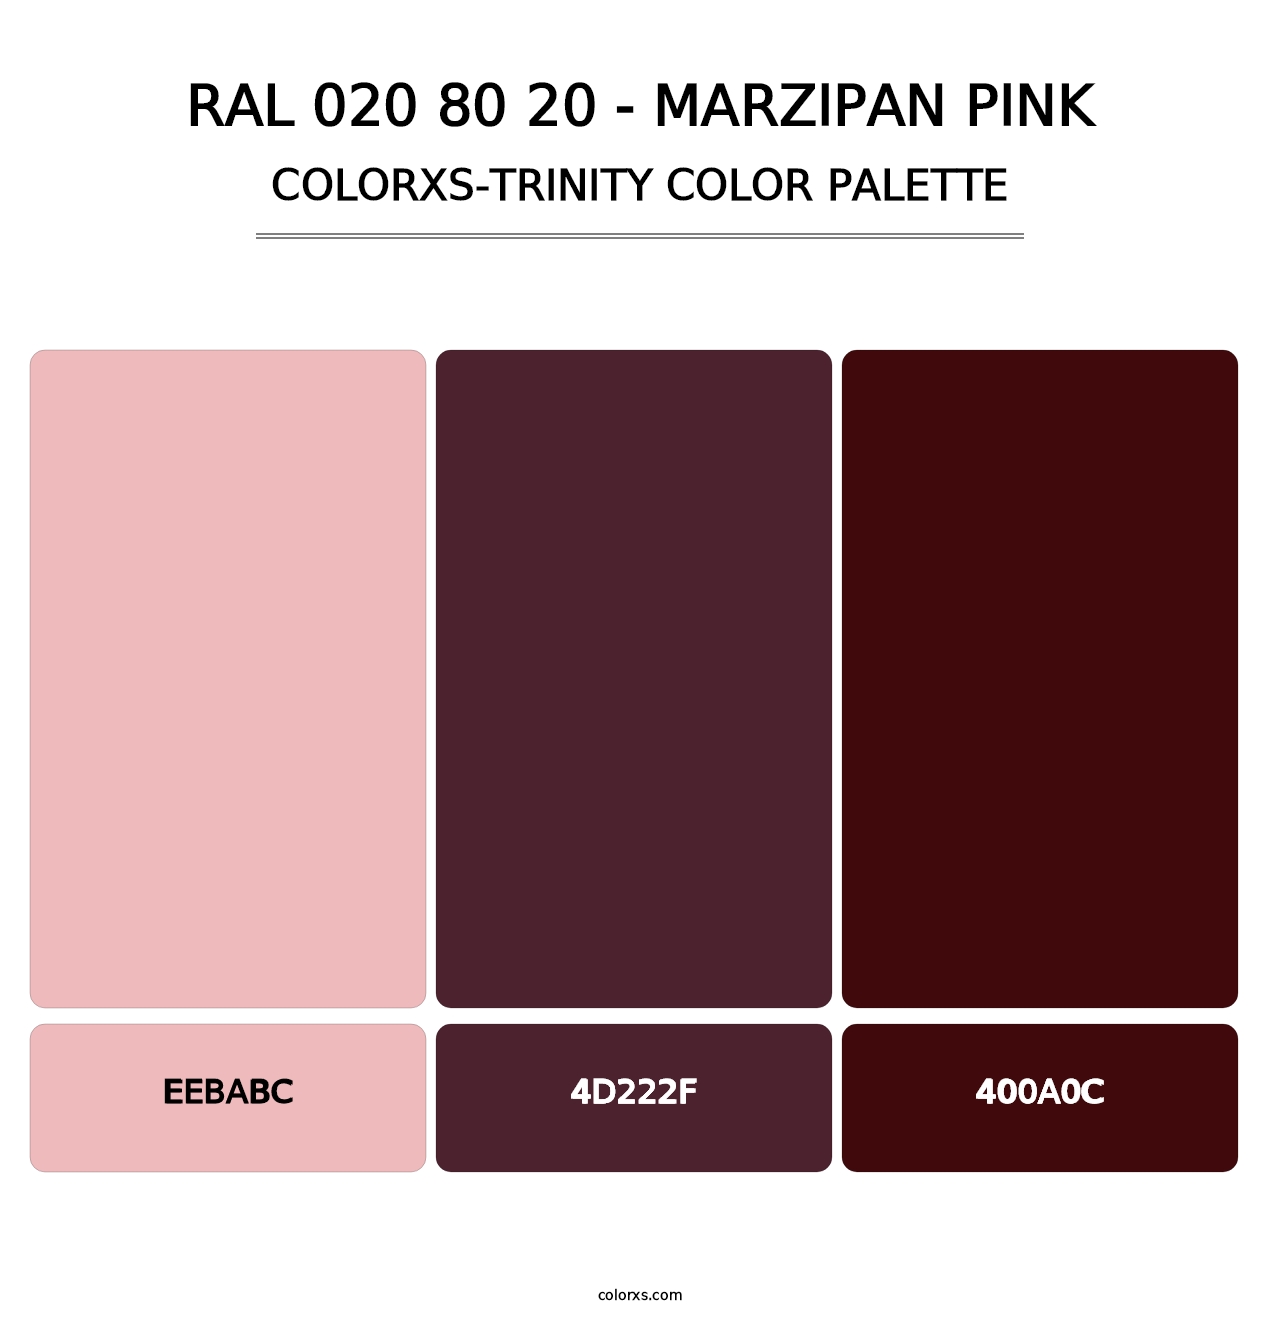 RAL 020 80 20 - Marzipan Pink - Colorxs Trinity Palette